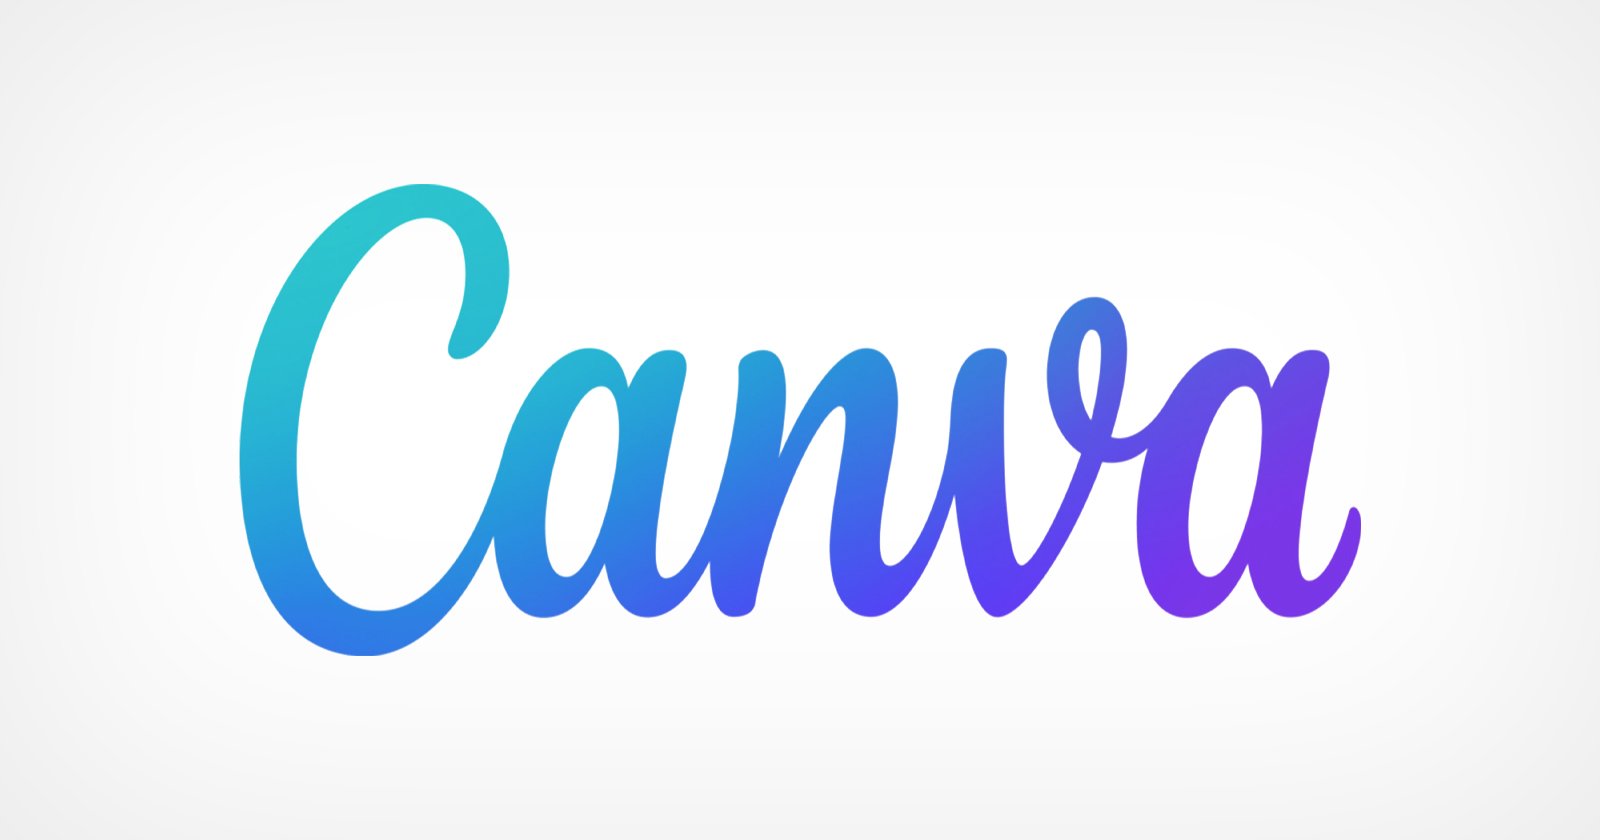 Canva-Passes-100-Million-Monthly-Active-Users-Nearly-4x-That-of-Adobe.jpg